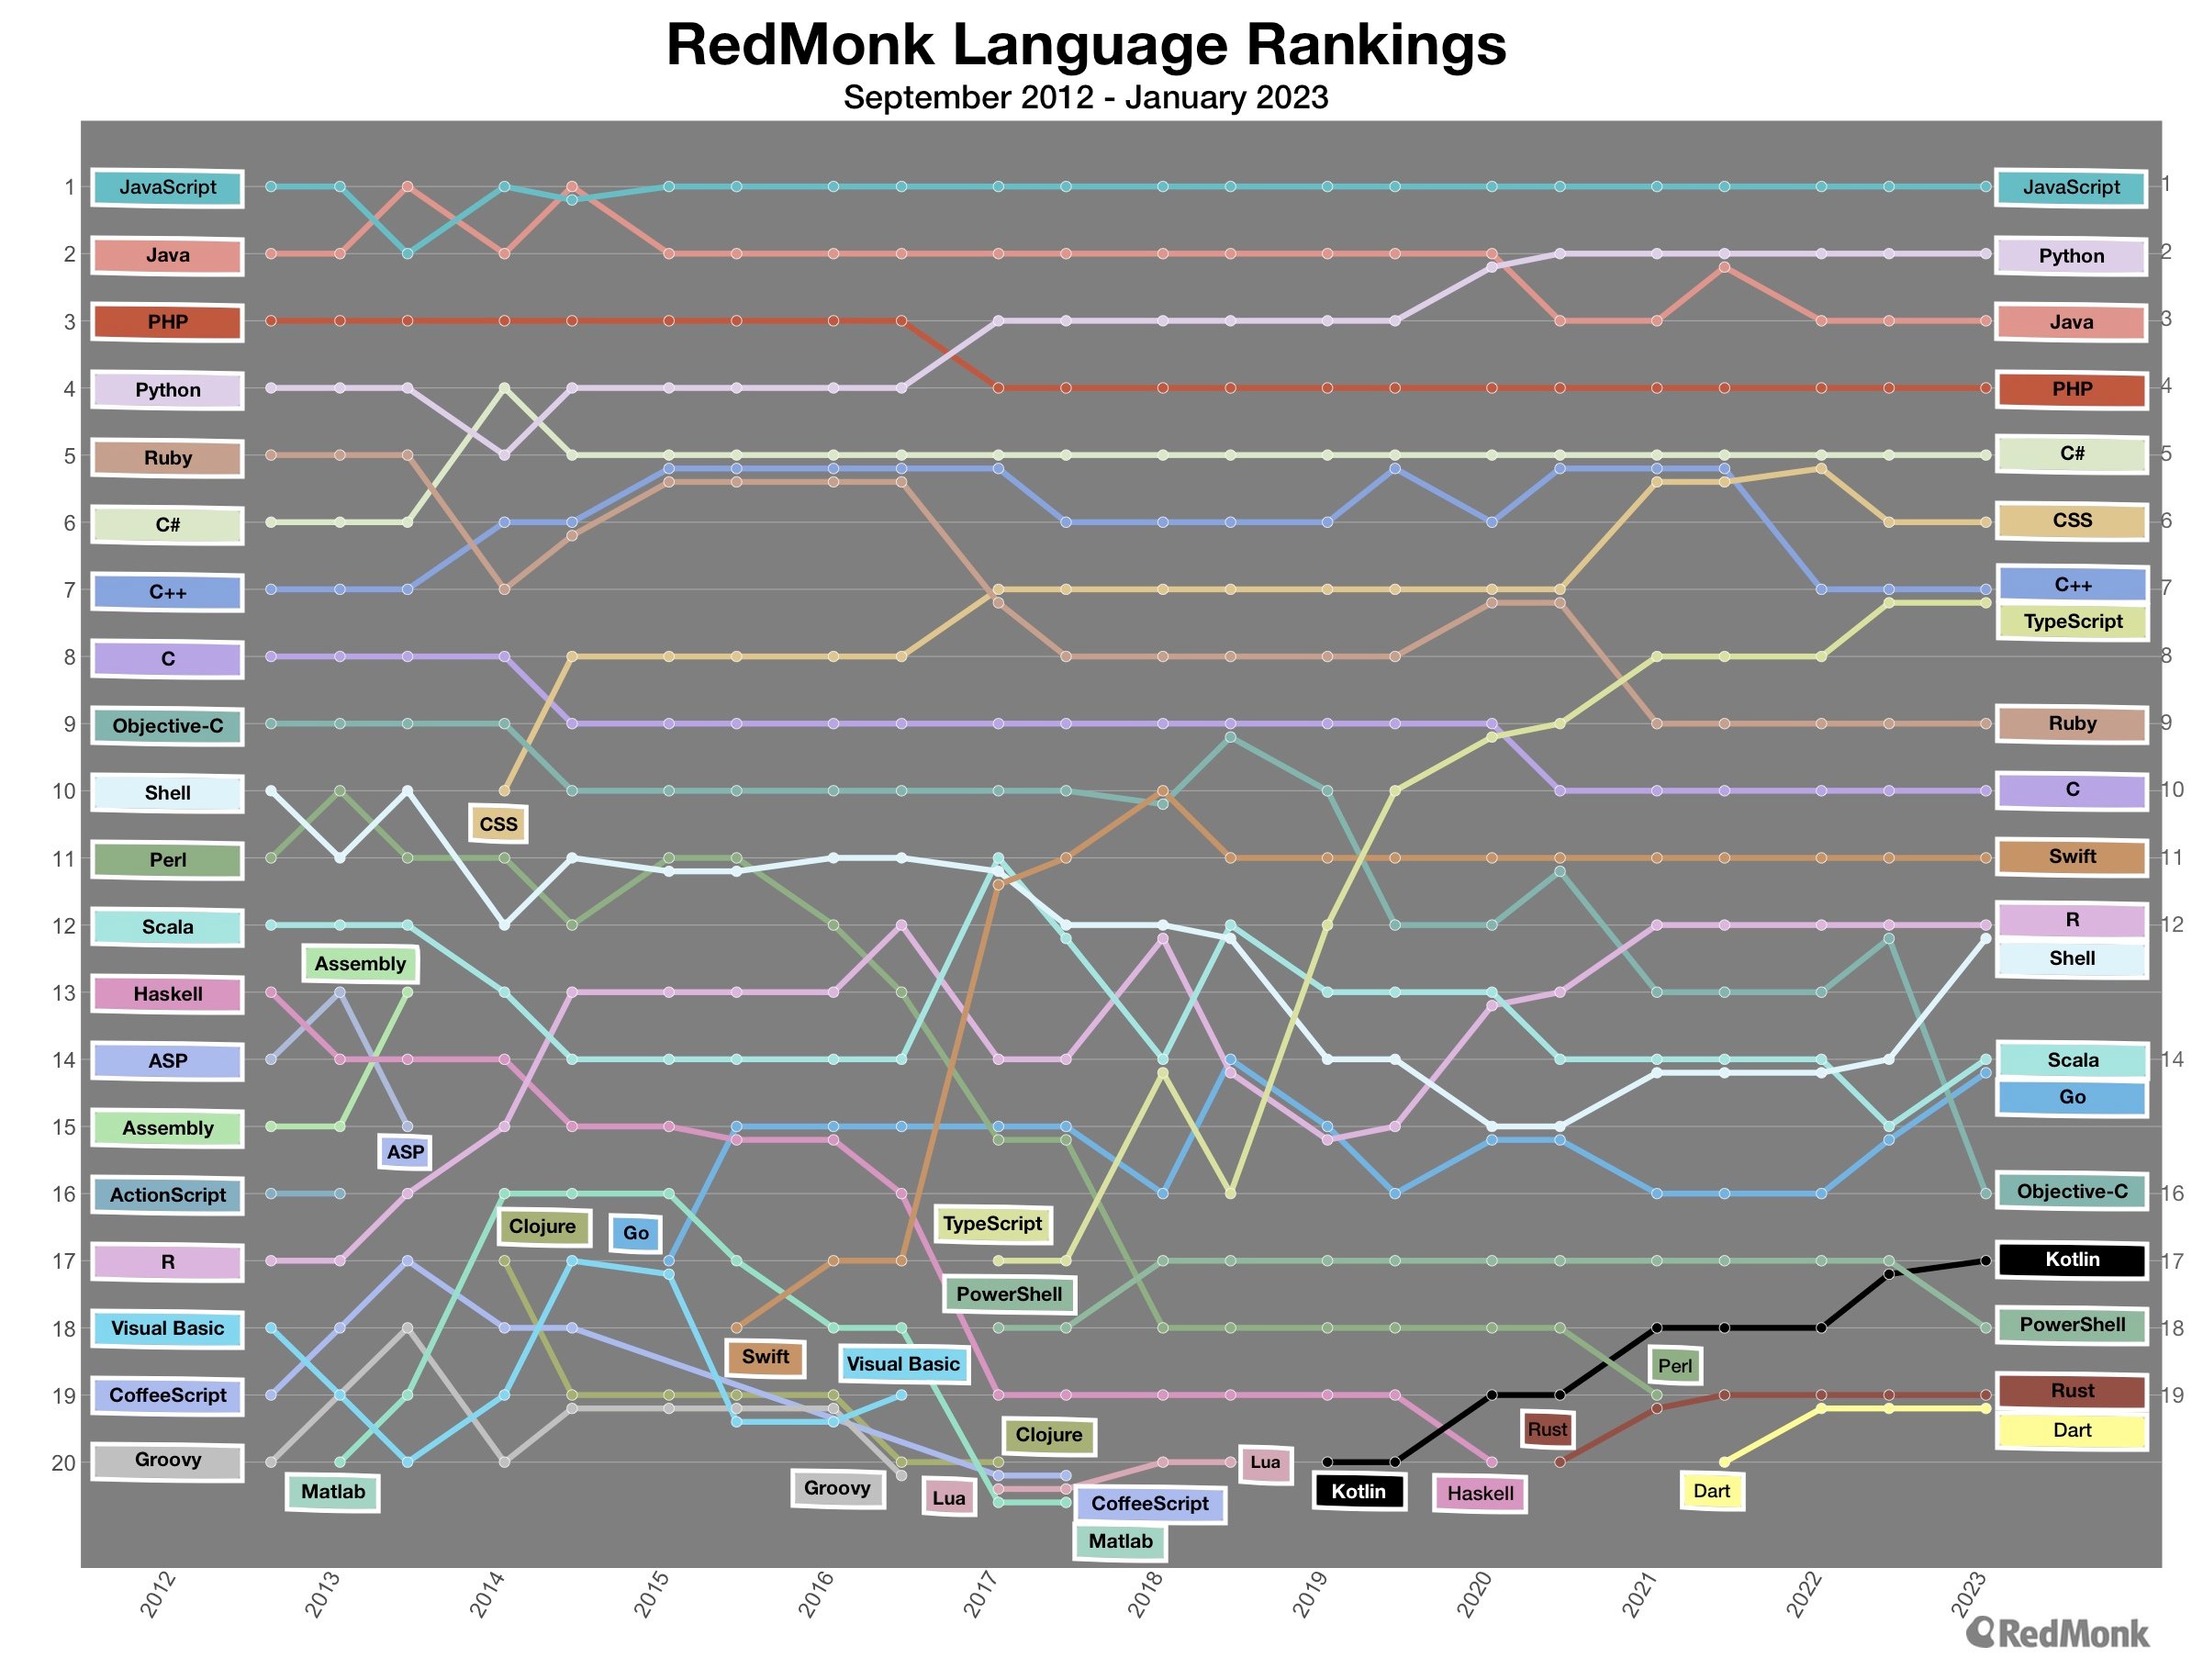 Top 20 languages over time. X-axis shows time ranging from 2012 to 2023. y-axis shows ranks 1-20. languages are plotted by rank for each semi-annual iteration of the rankings.